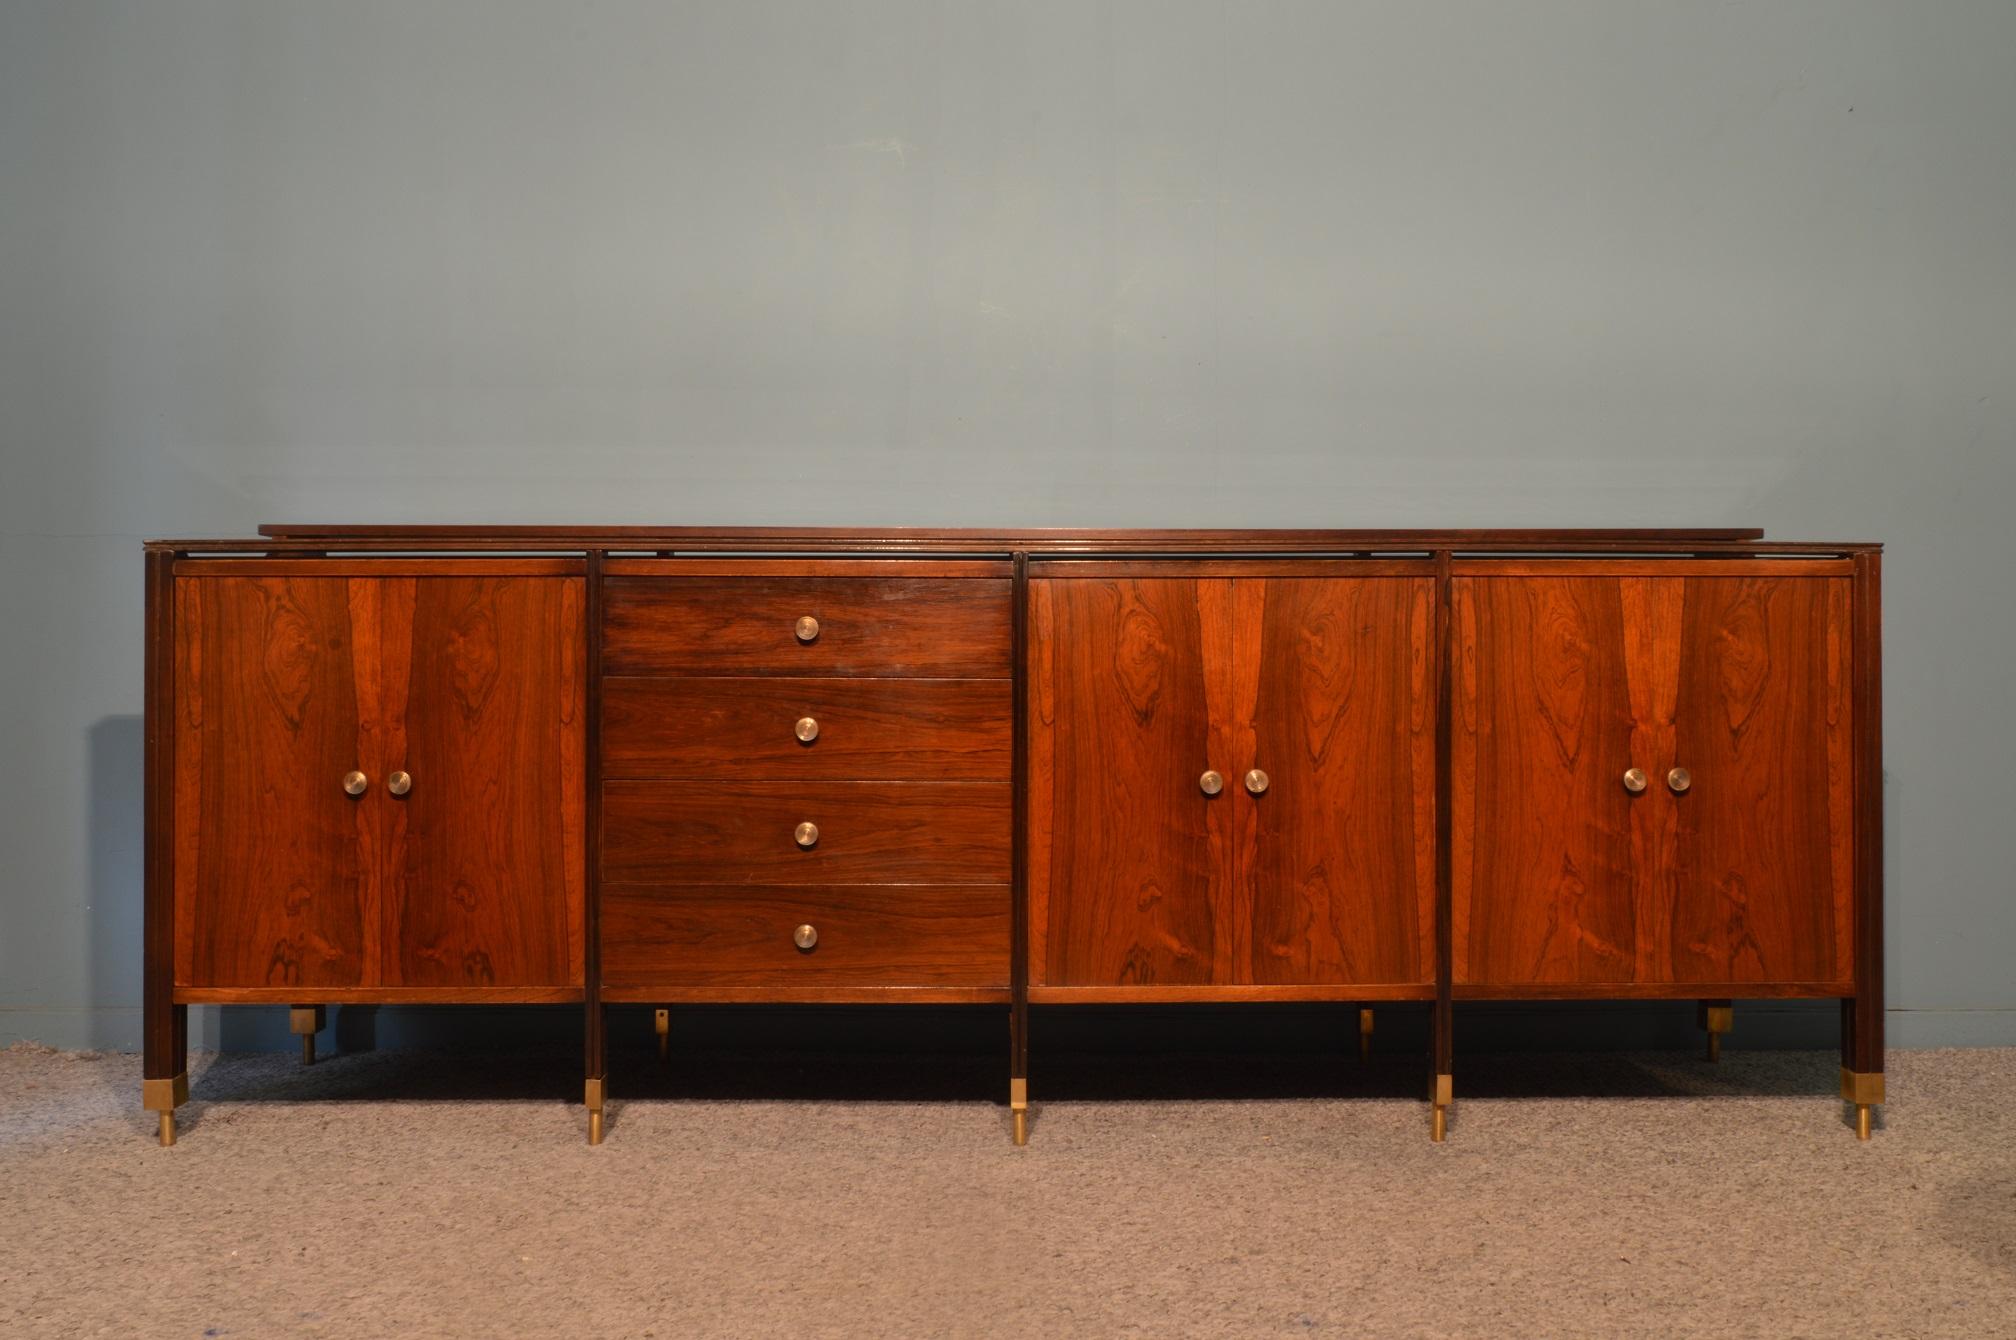 Sideboard bi Carlo di Carli in rosewood, opaline glass and brass.
Italian work, circa 1960.
The top is covered by a black opaline glass.
Each parts are in rosewood even back and inside.
Each feet and handles are in solid brass.
This furniture